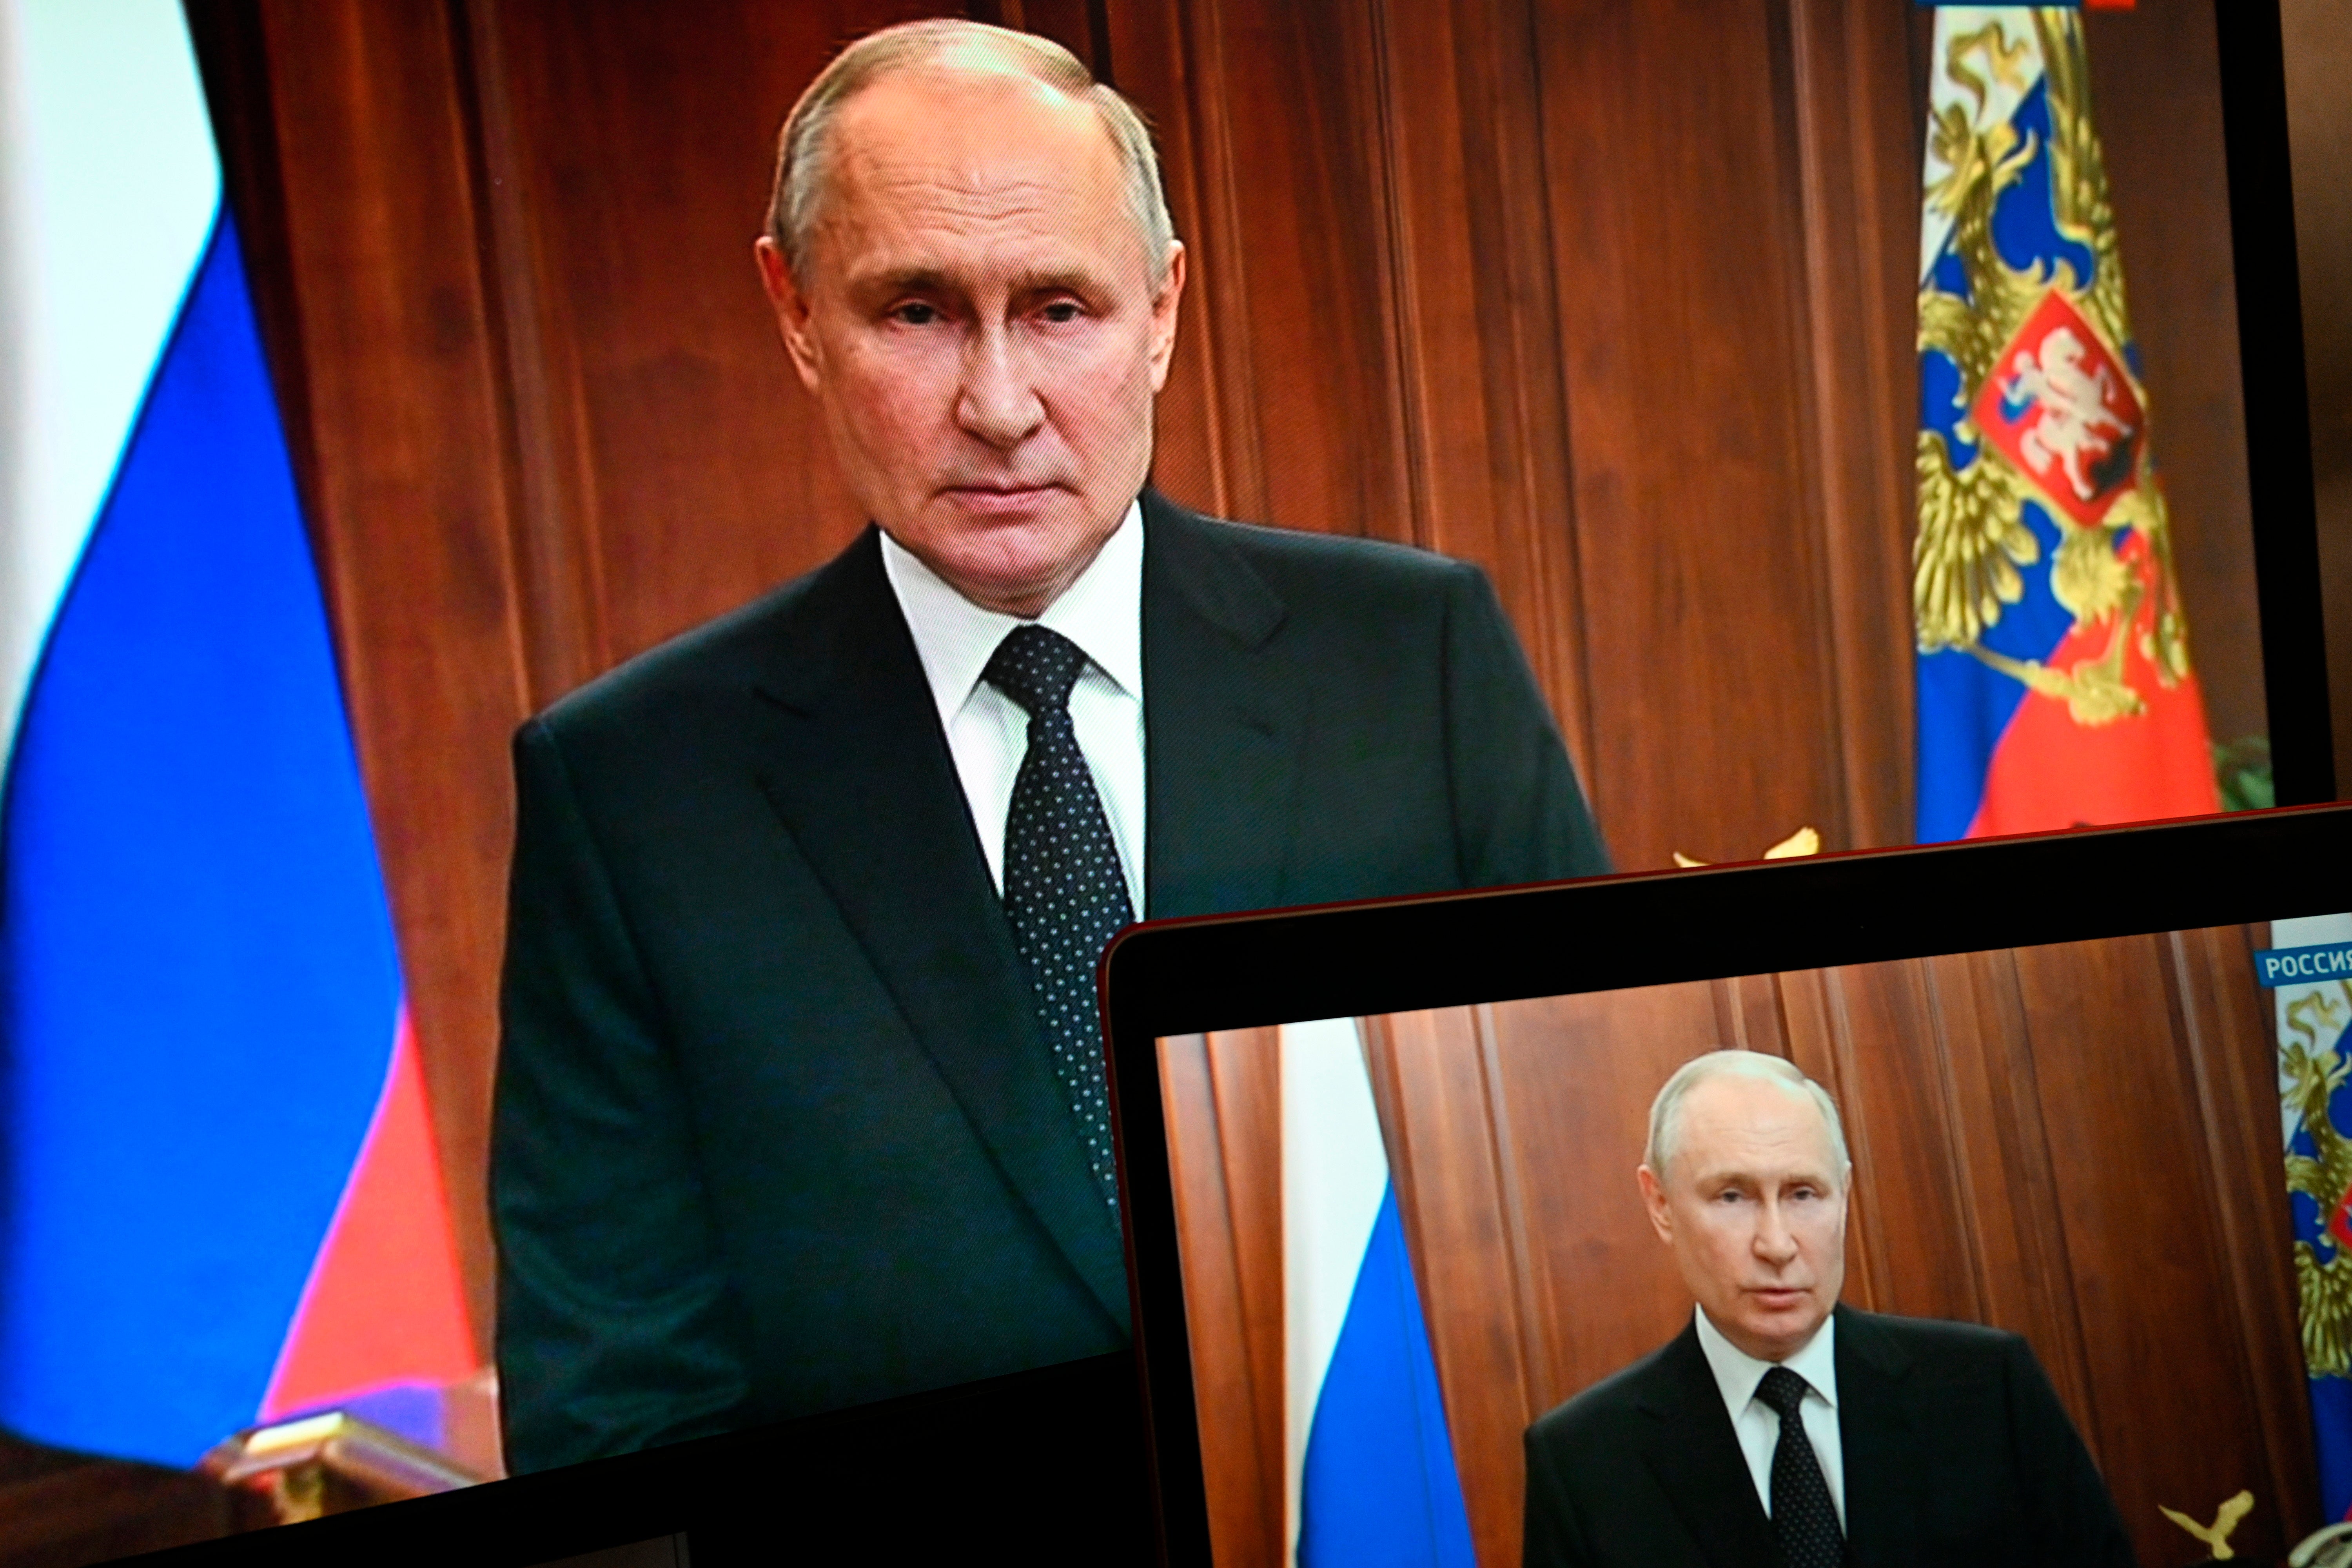 Russian President Vladimir Putin is seen on monitors as he addresses the nation after Yevgeny Prigozhin, the owner of the Wagner Group military company, called for armed rebellion and reached the southern city of Rostov-on-Don with his troops, in Moscow. (Pavel Bednyakov, Sputnik, Kremlin Pool Photo via AP)